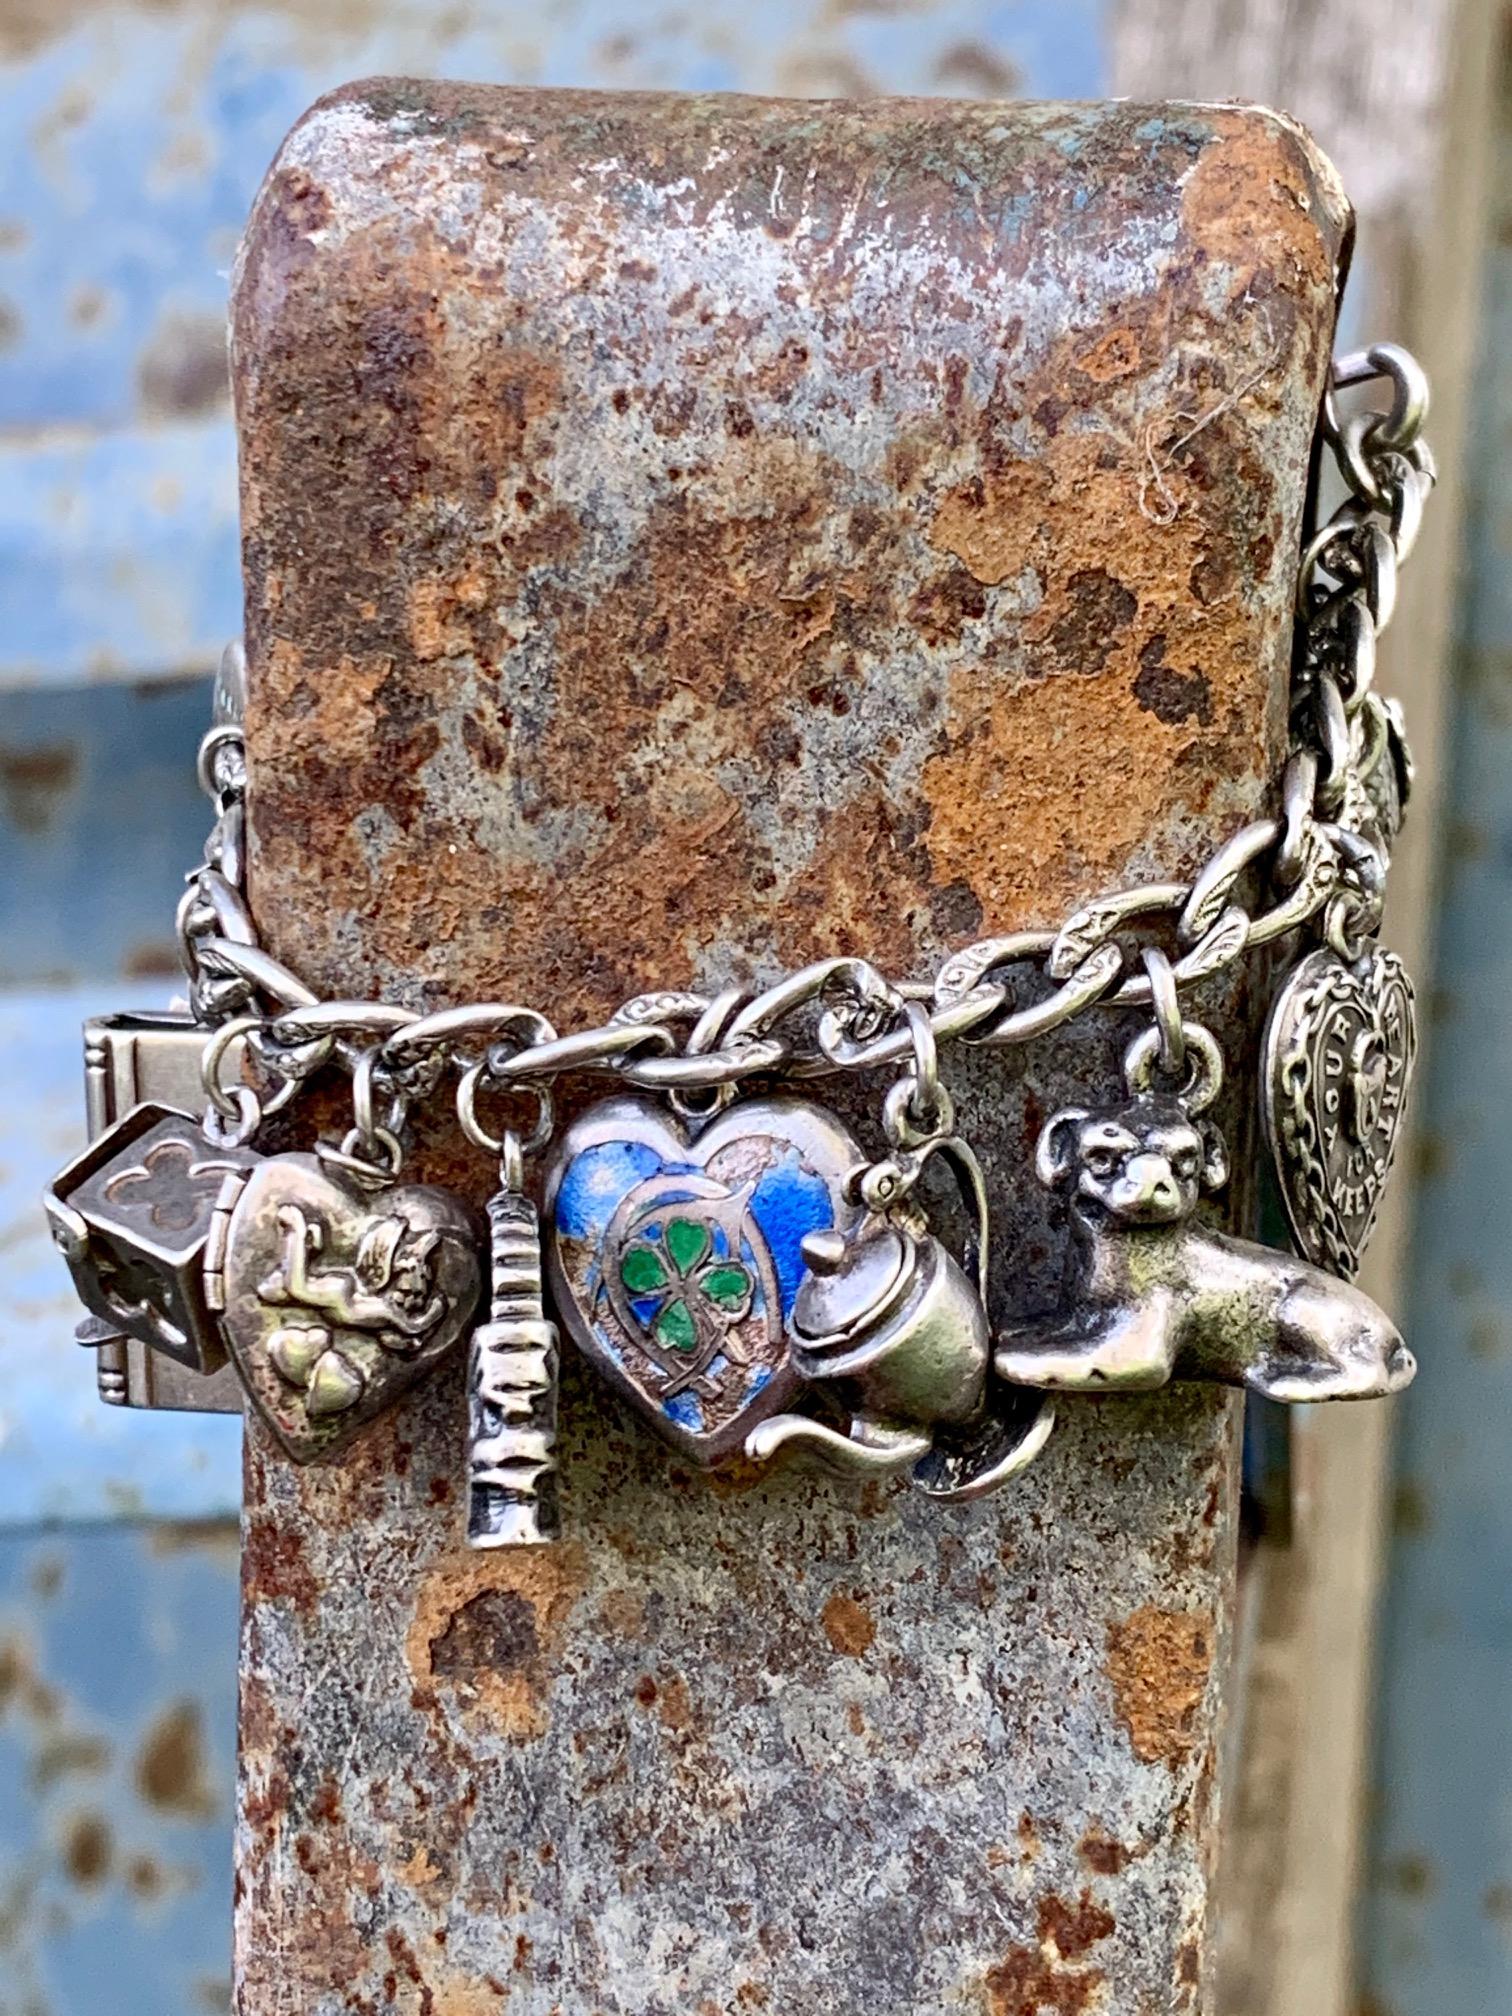 This charm bracelet truly is 